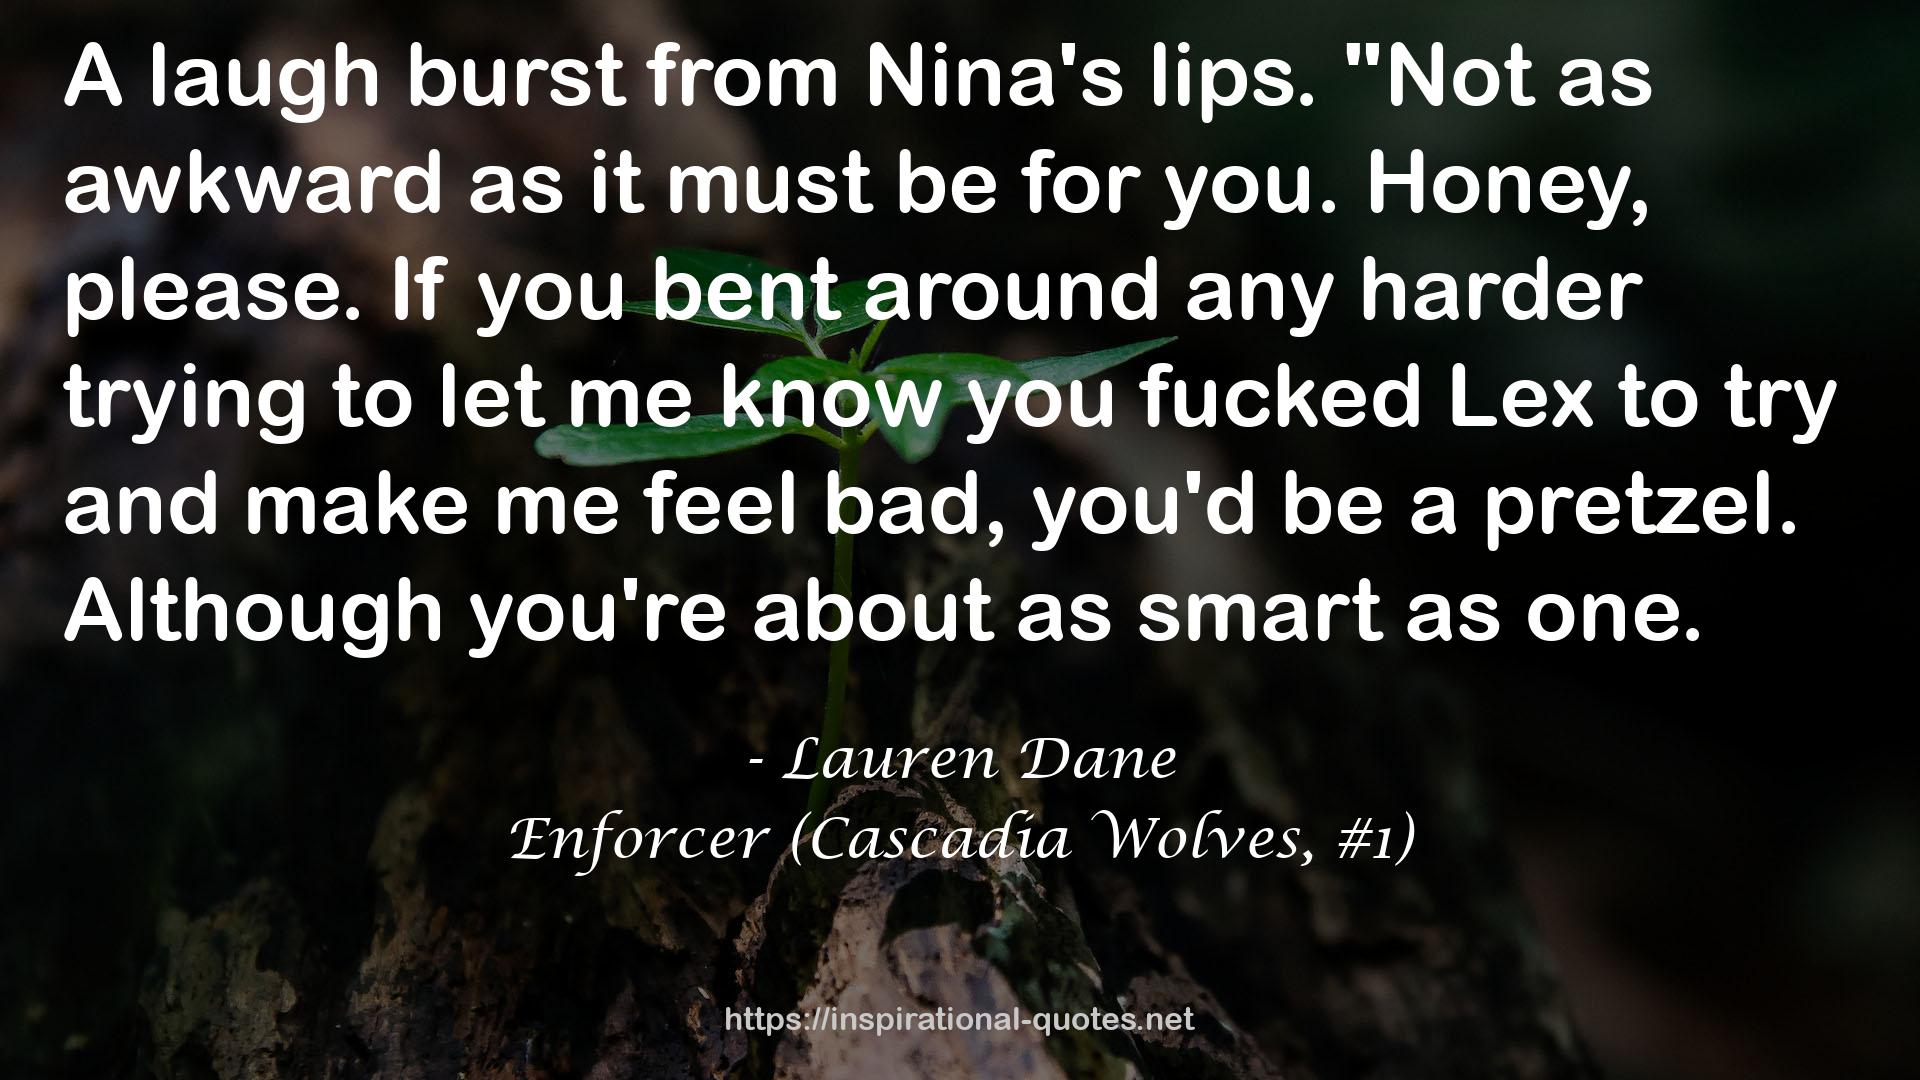 Enforcer (Cascadia Wolves, #1) QUOTES